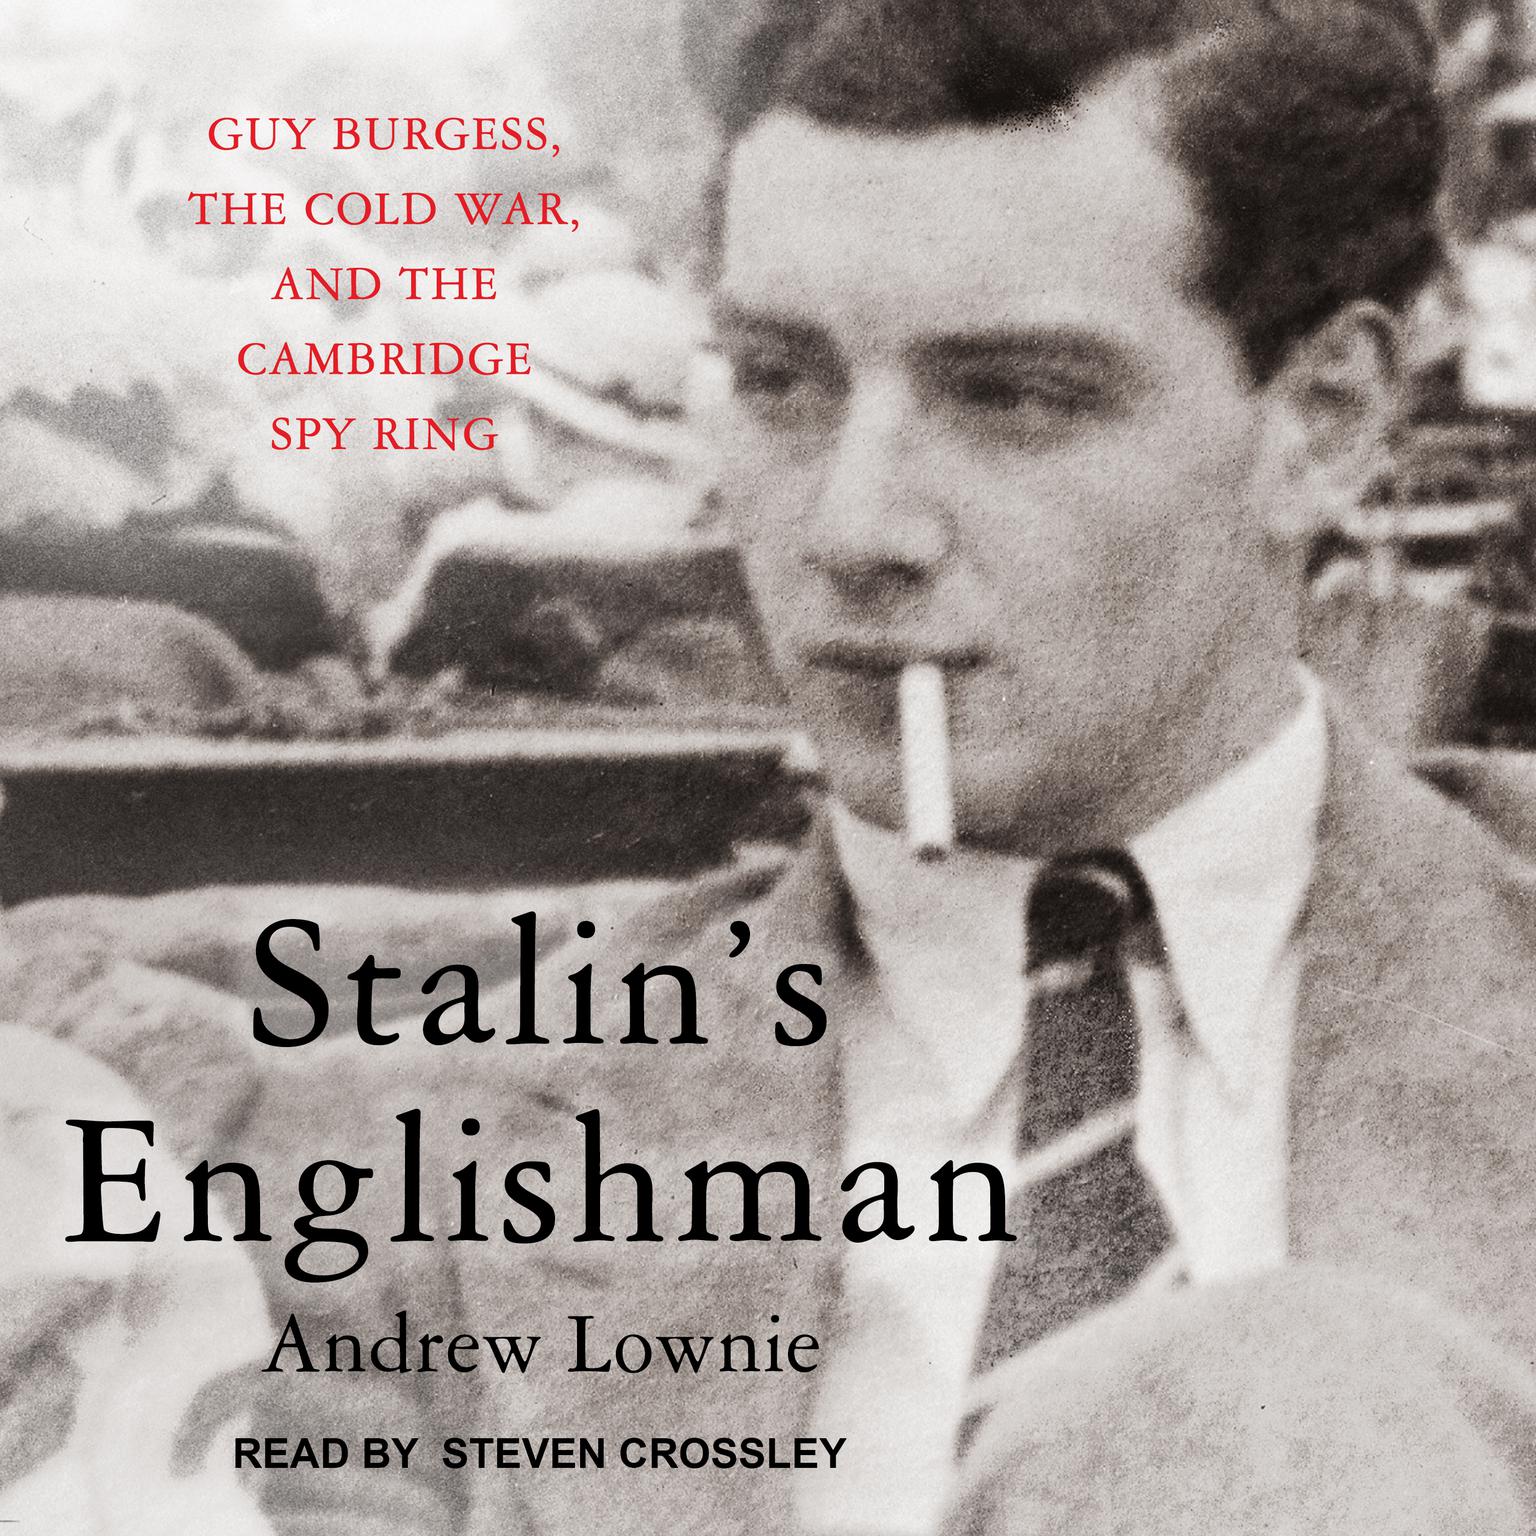 Stalins Englishman: Guy Burgess, the Cold War, and the Cambridge Spy Ring Audiobook, by Andrew Lownie